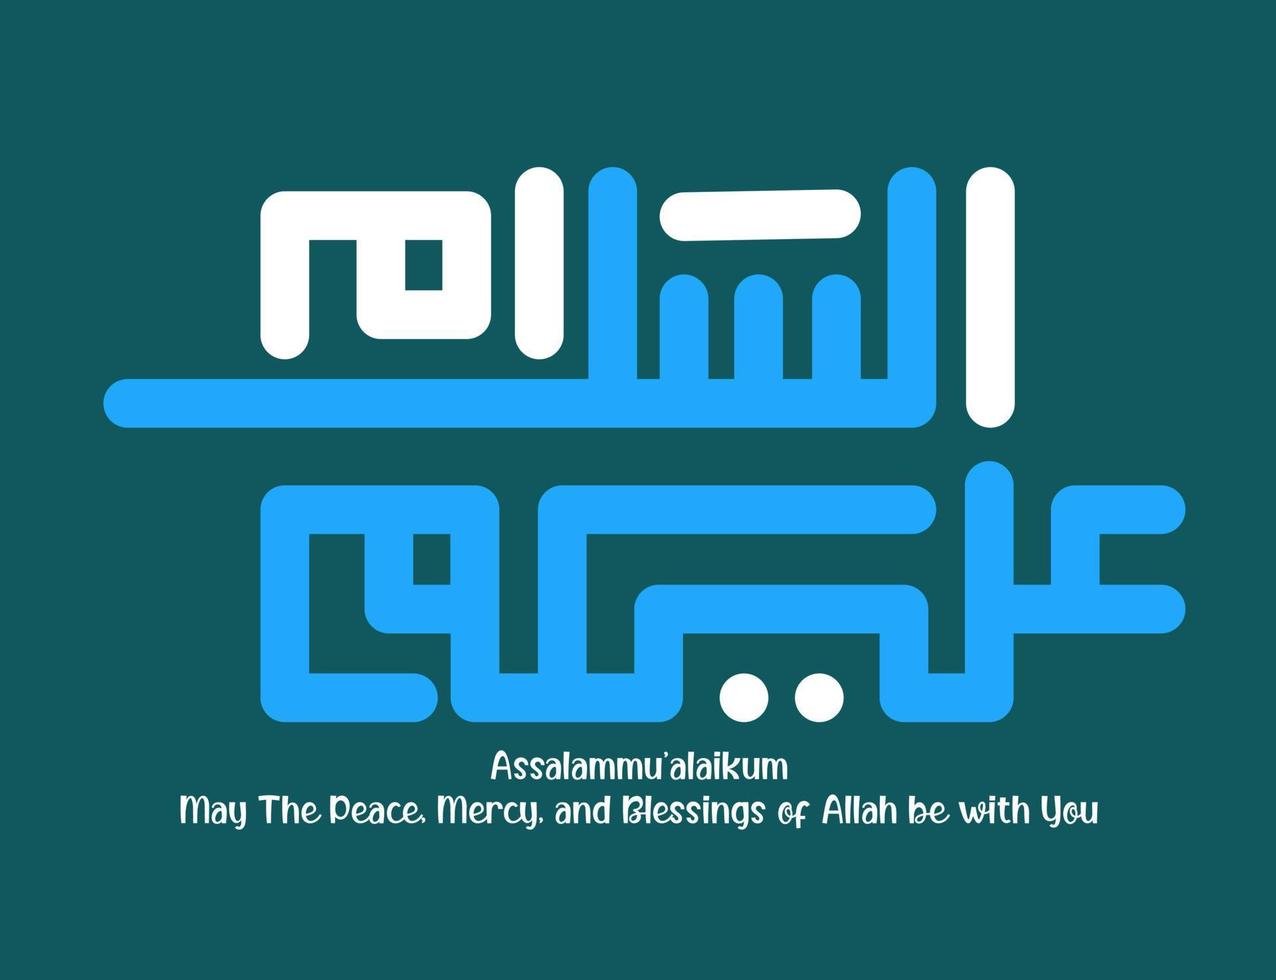 assalammualaikum is mean peace for you, kufic background logo icon vector